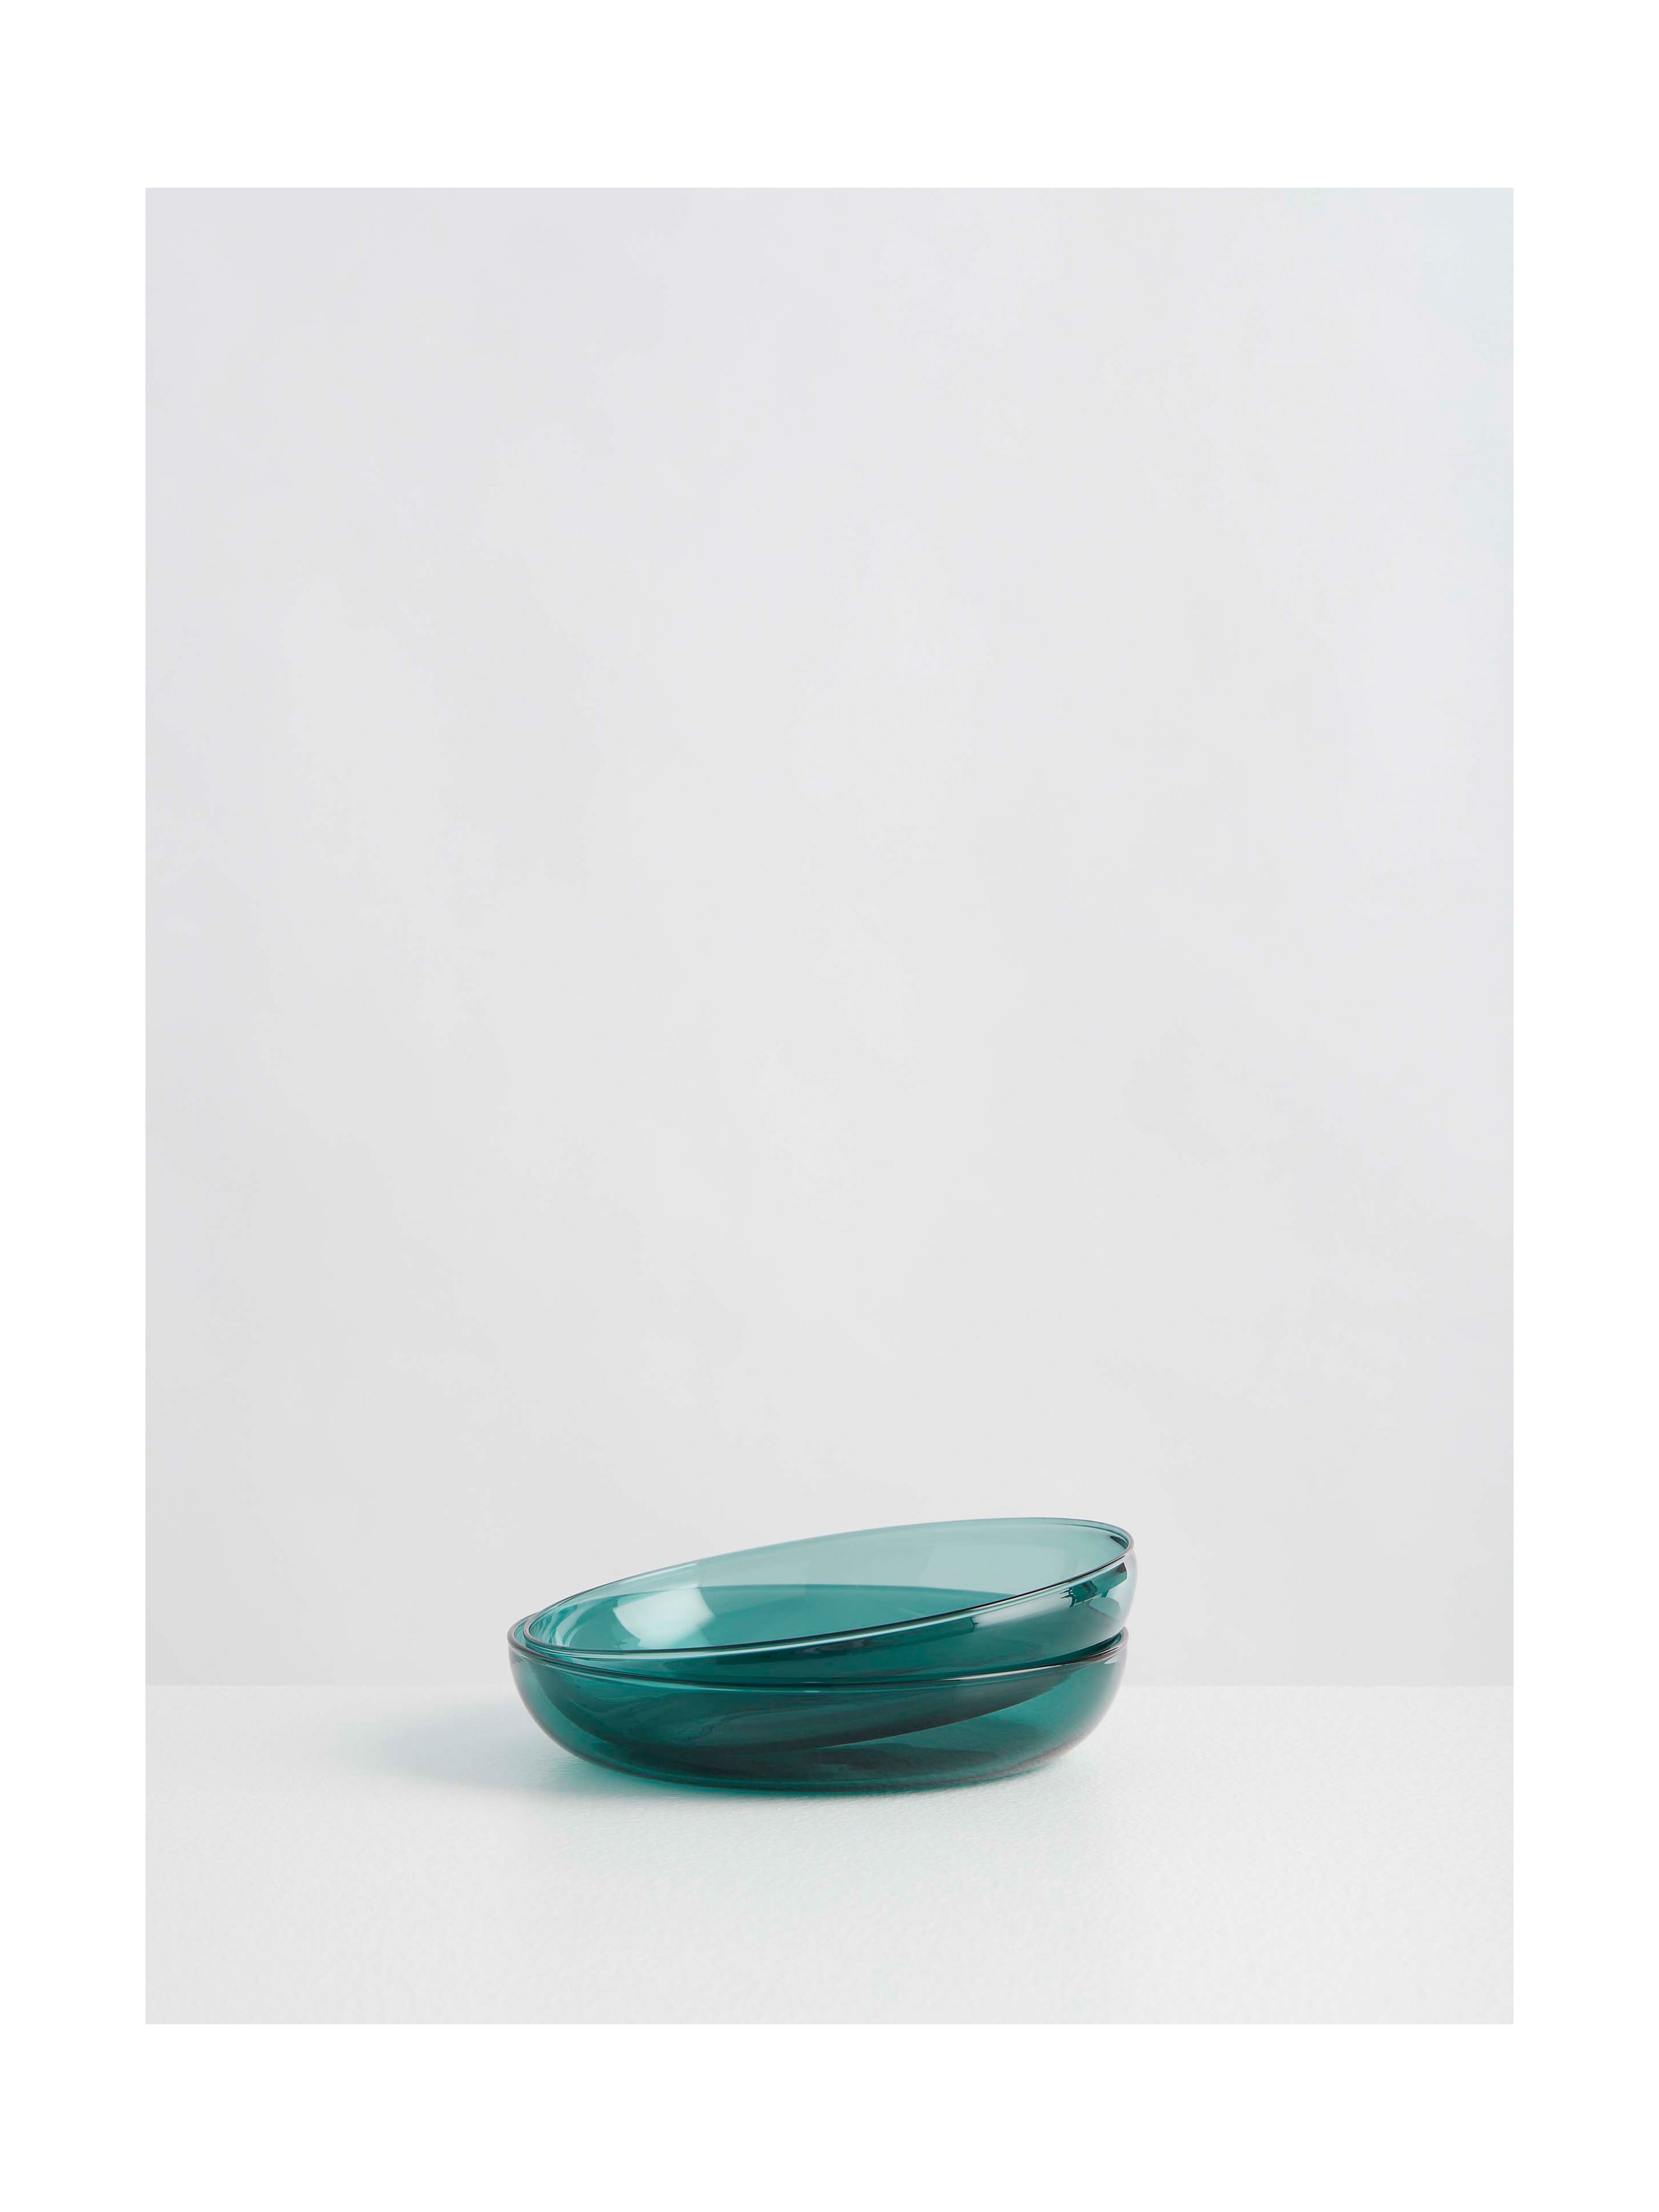 TEAL GLASS PLATES